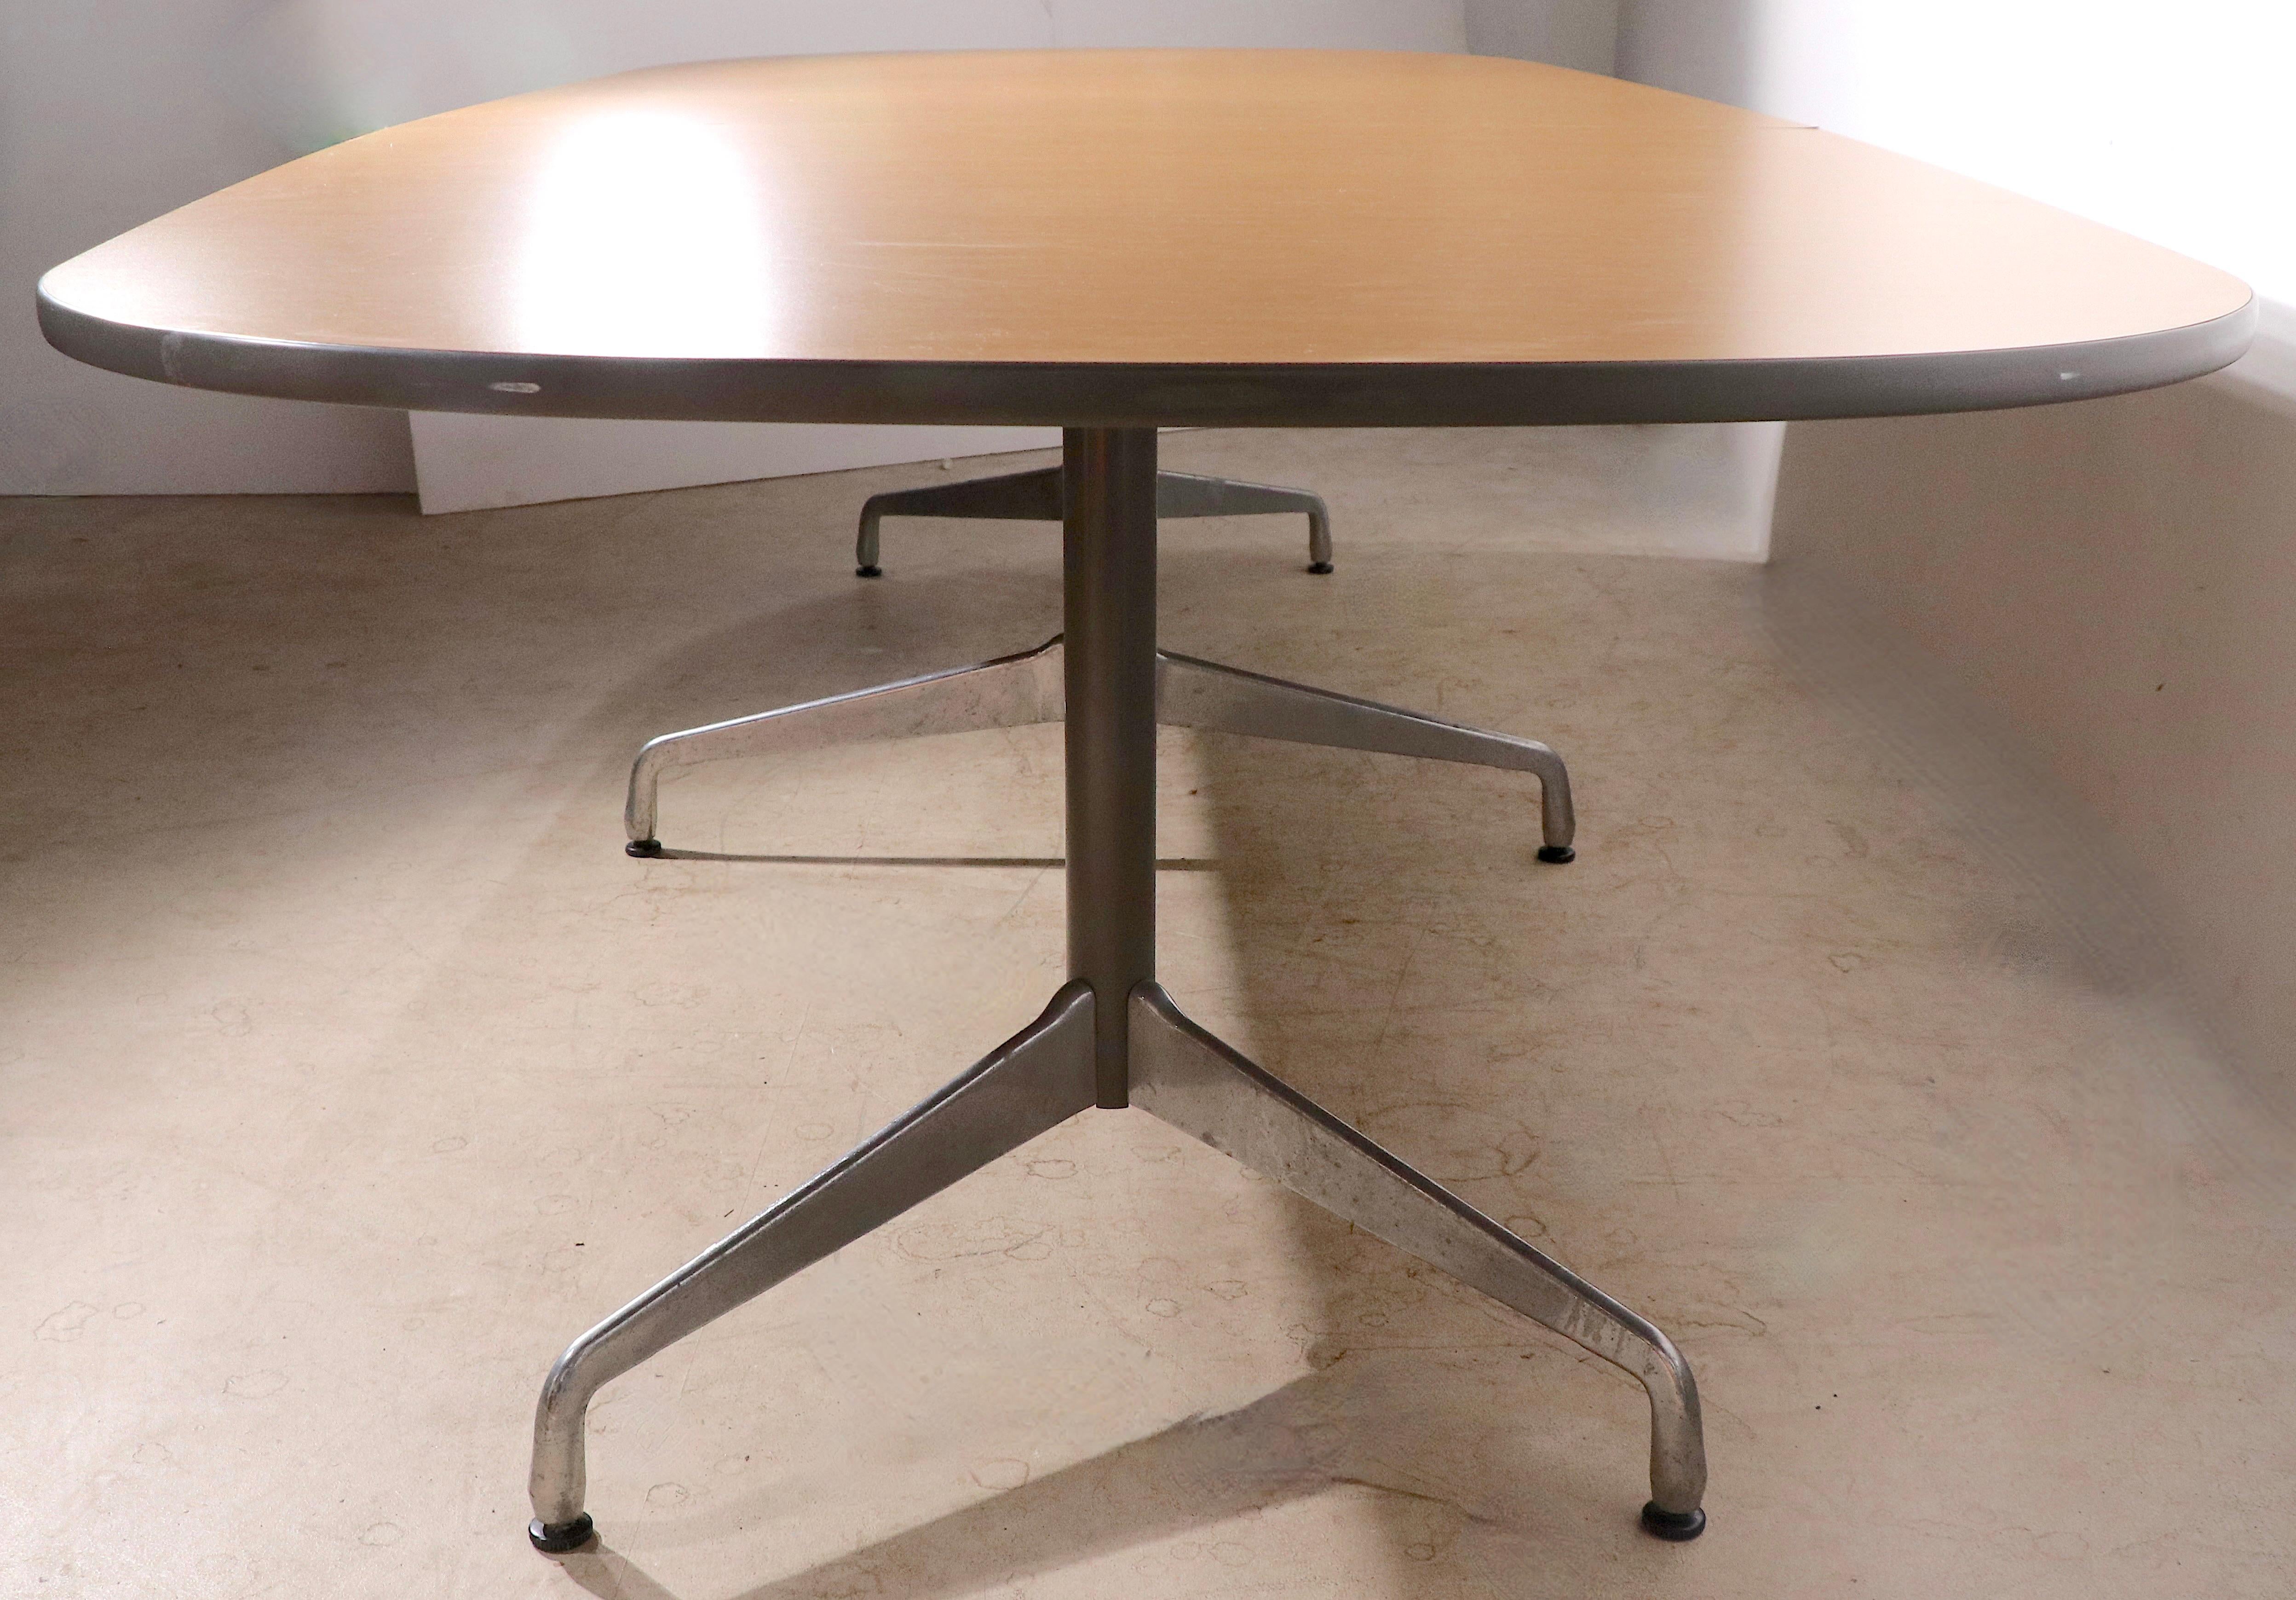 Exceptional Eames Aluminum Group conference, dining table with three part segmented style base. The oval top features a faux wood grain pattern, with gray plastic racetrack trim, it mounts to the three section base, each section has cast aluminum